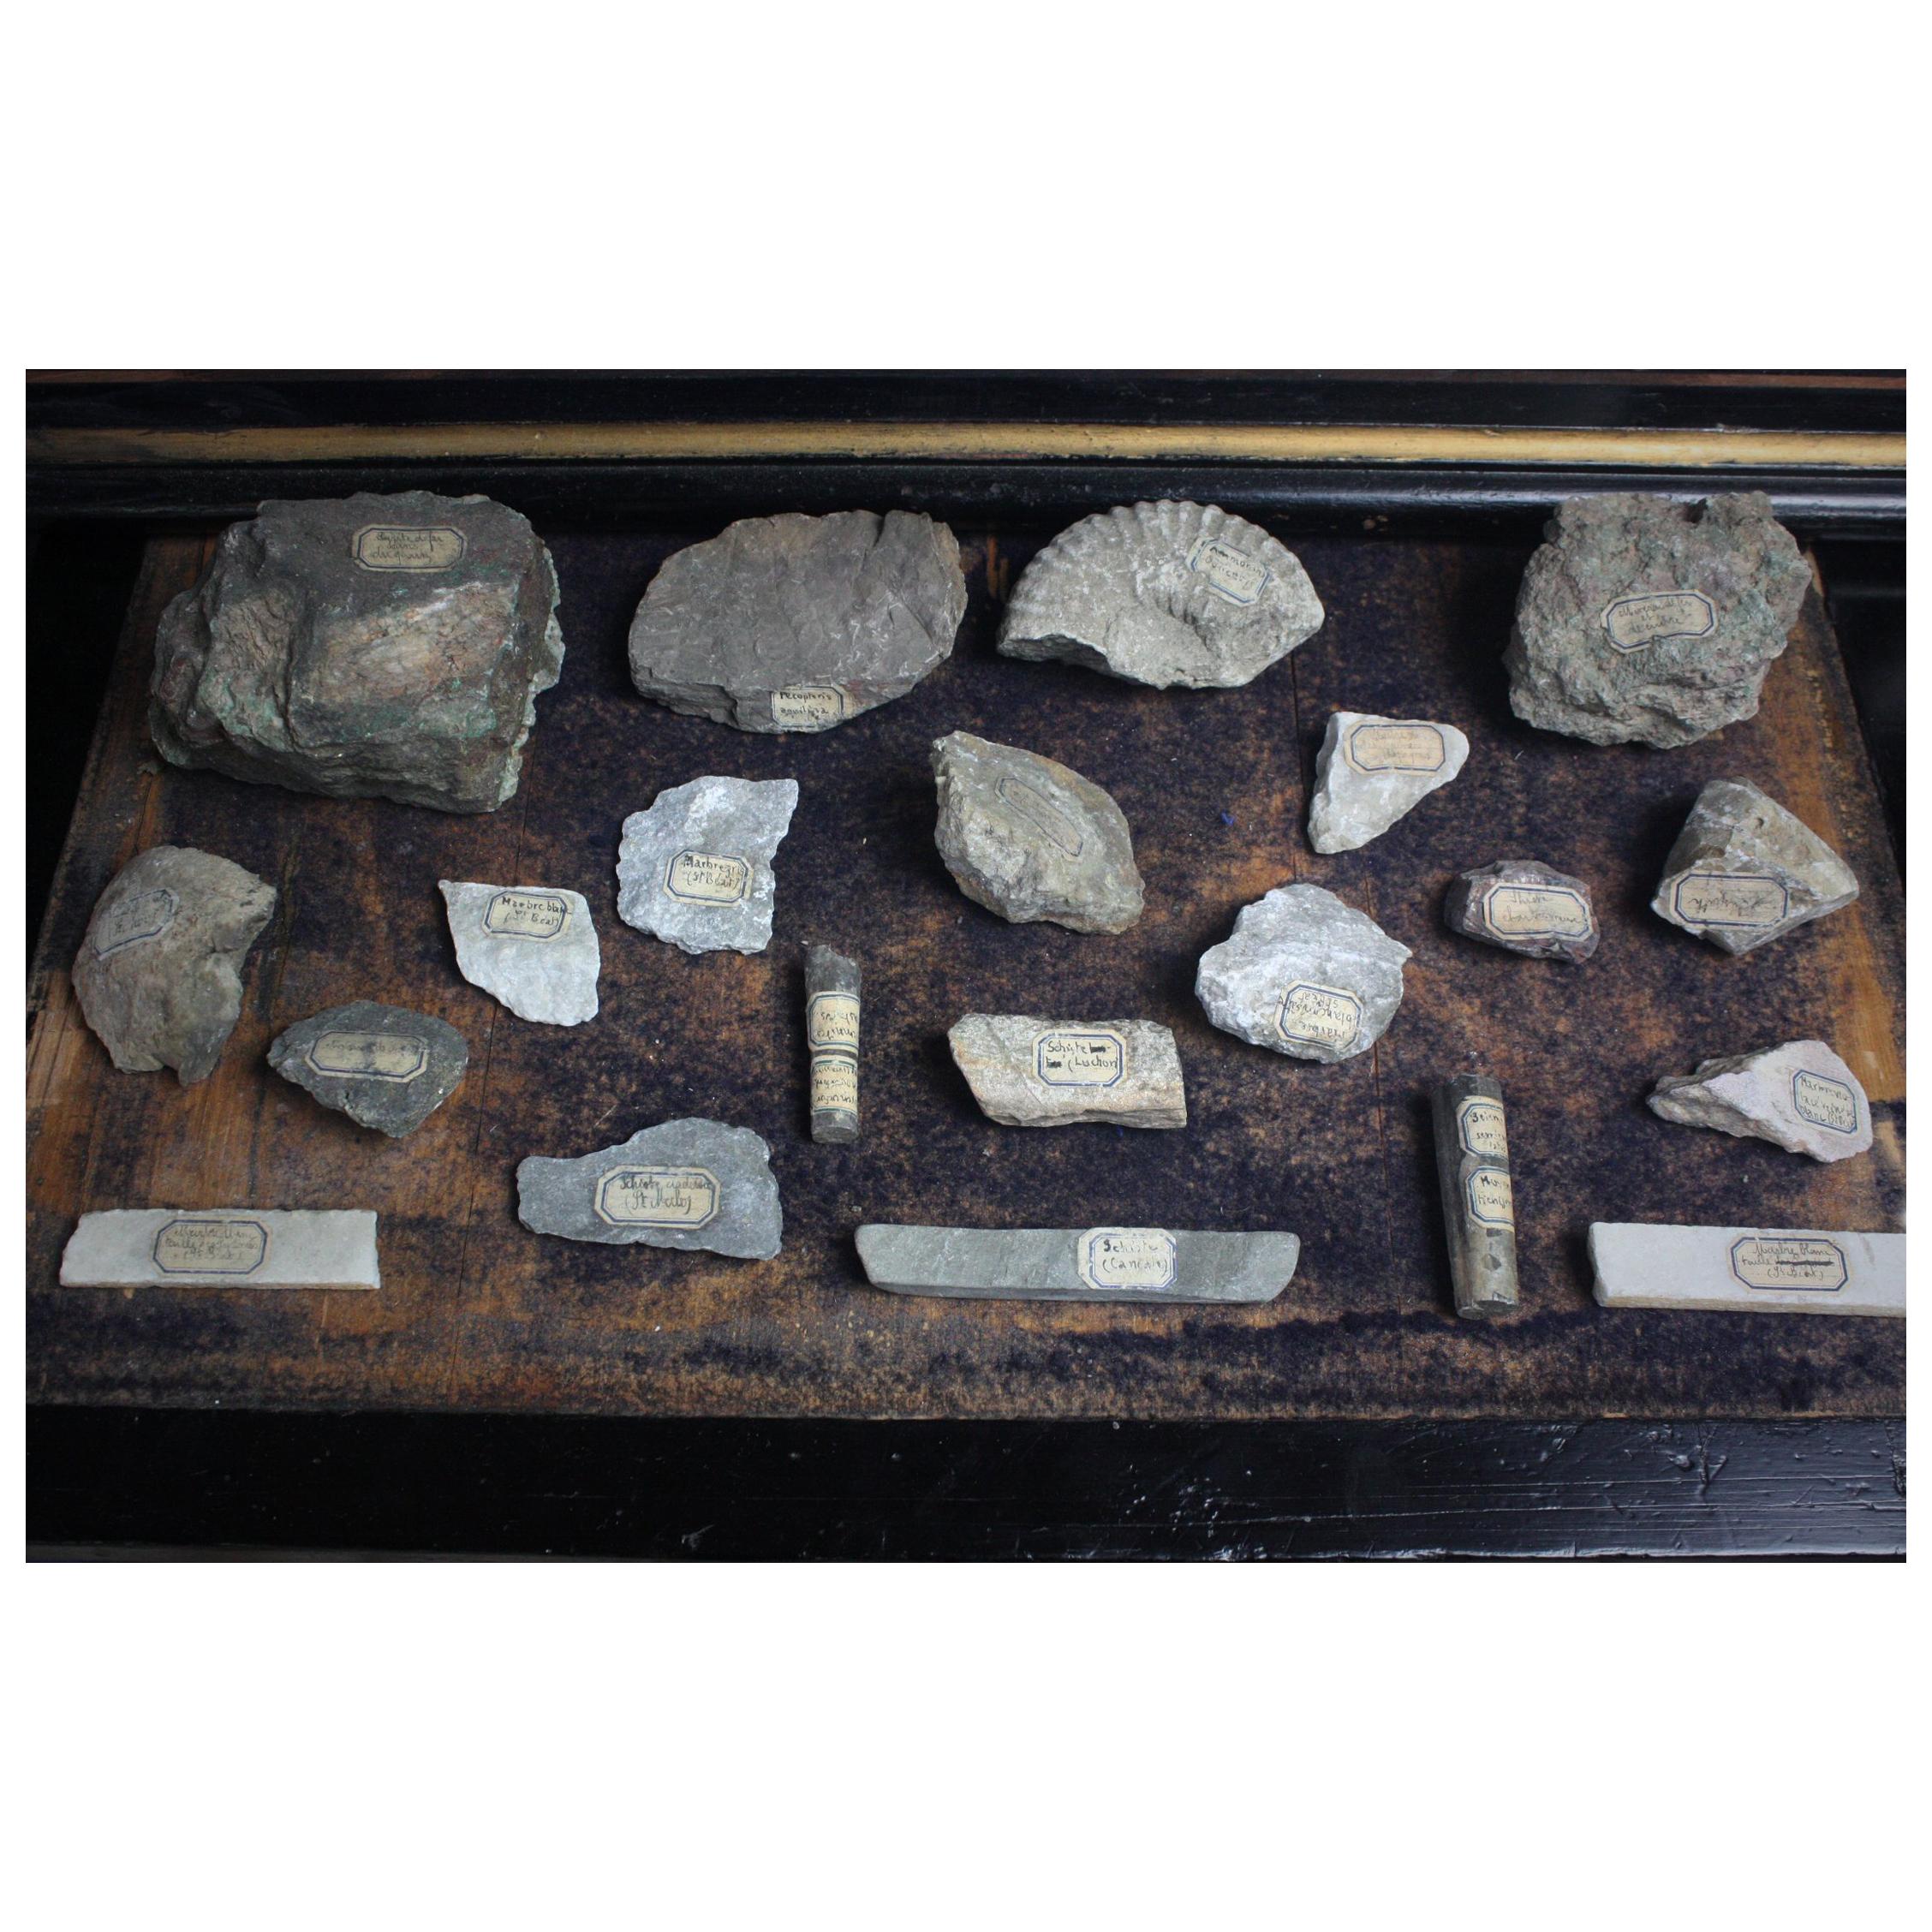 A small collection of Metamorphic and Sedimentary rocks all with original labels. French in origin, mid 19th century in age. 21 in total. Largest specimen is approx 

12 by 10cm. Smallest example 4 by 3 cm.